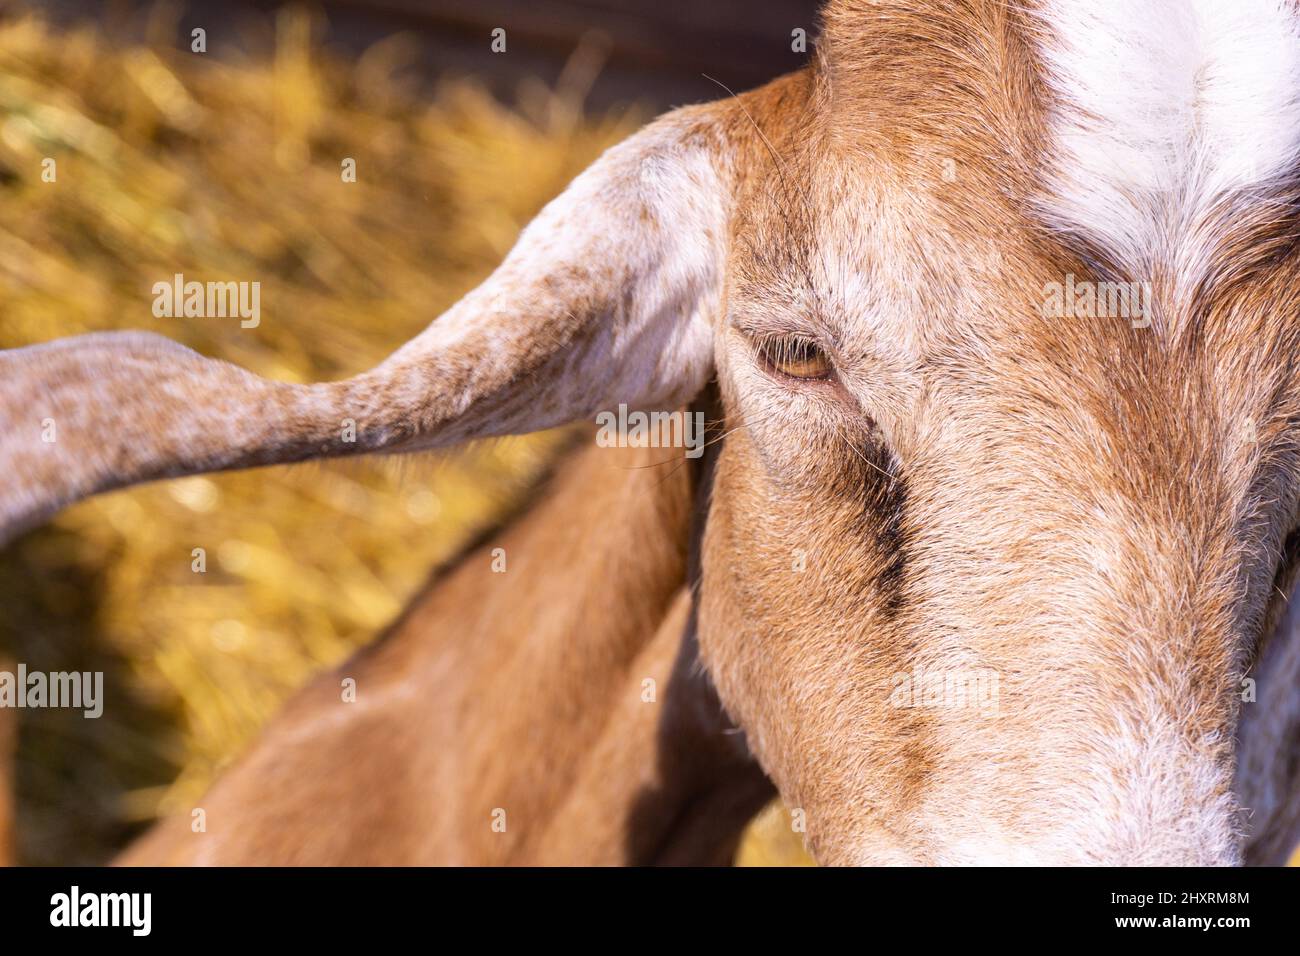 Red goat portrait on a farm Stock Photo